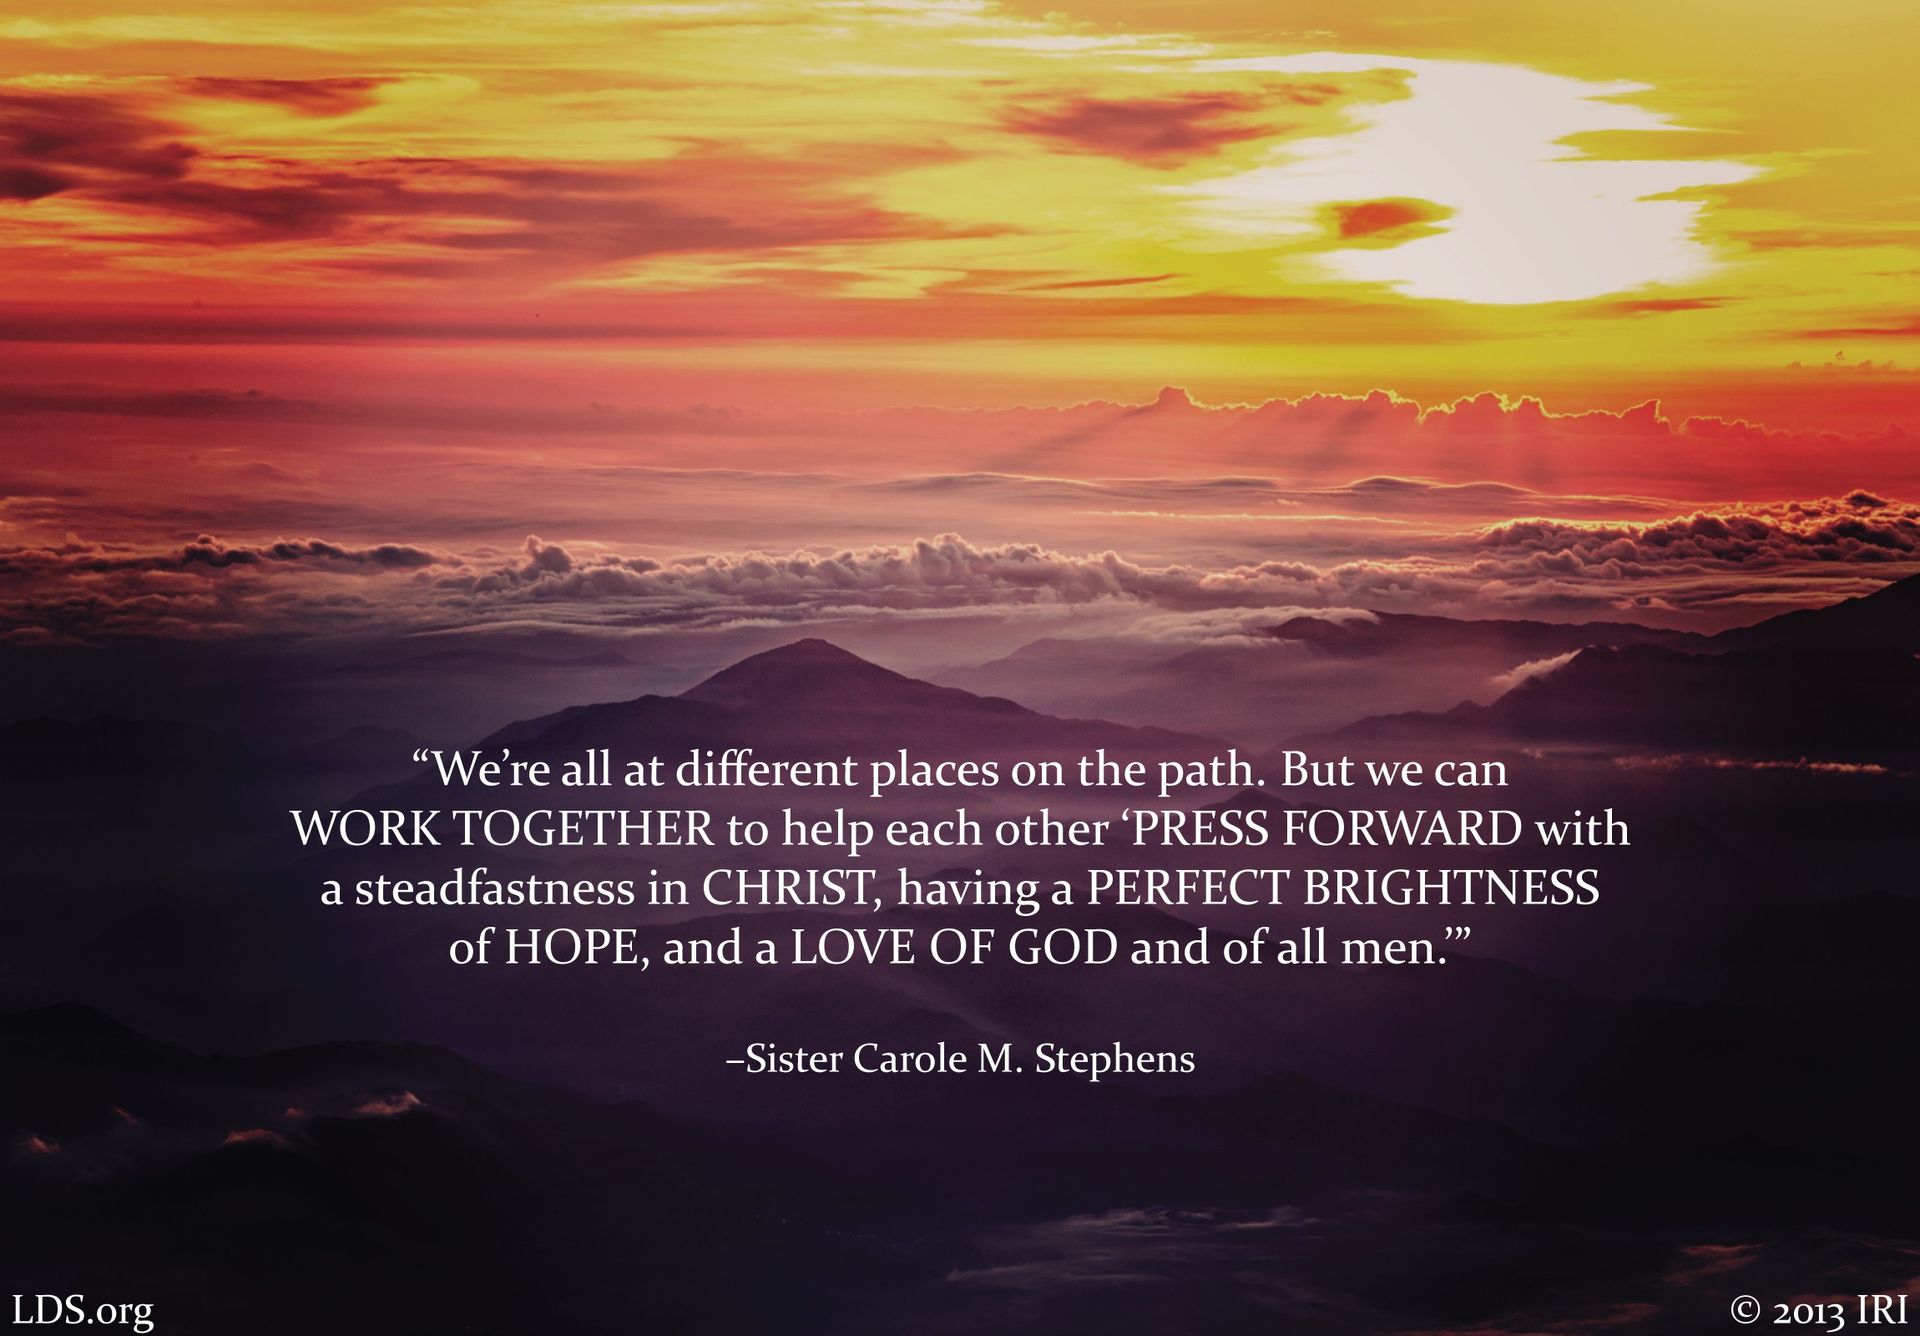 “We’re all at different places on the path. But we can work together to help each other ‘press forward with a steadfastness in Christ, having a perfect brightness of hope, and a love of God and of all men.’”—Sister Carole M. Stephens, “We Have Great Reason to Rejoice” © undefined ipCode 1.